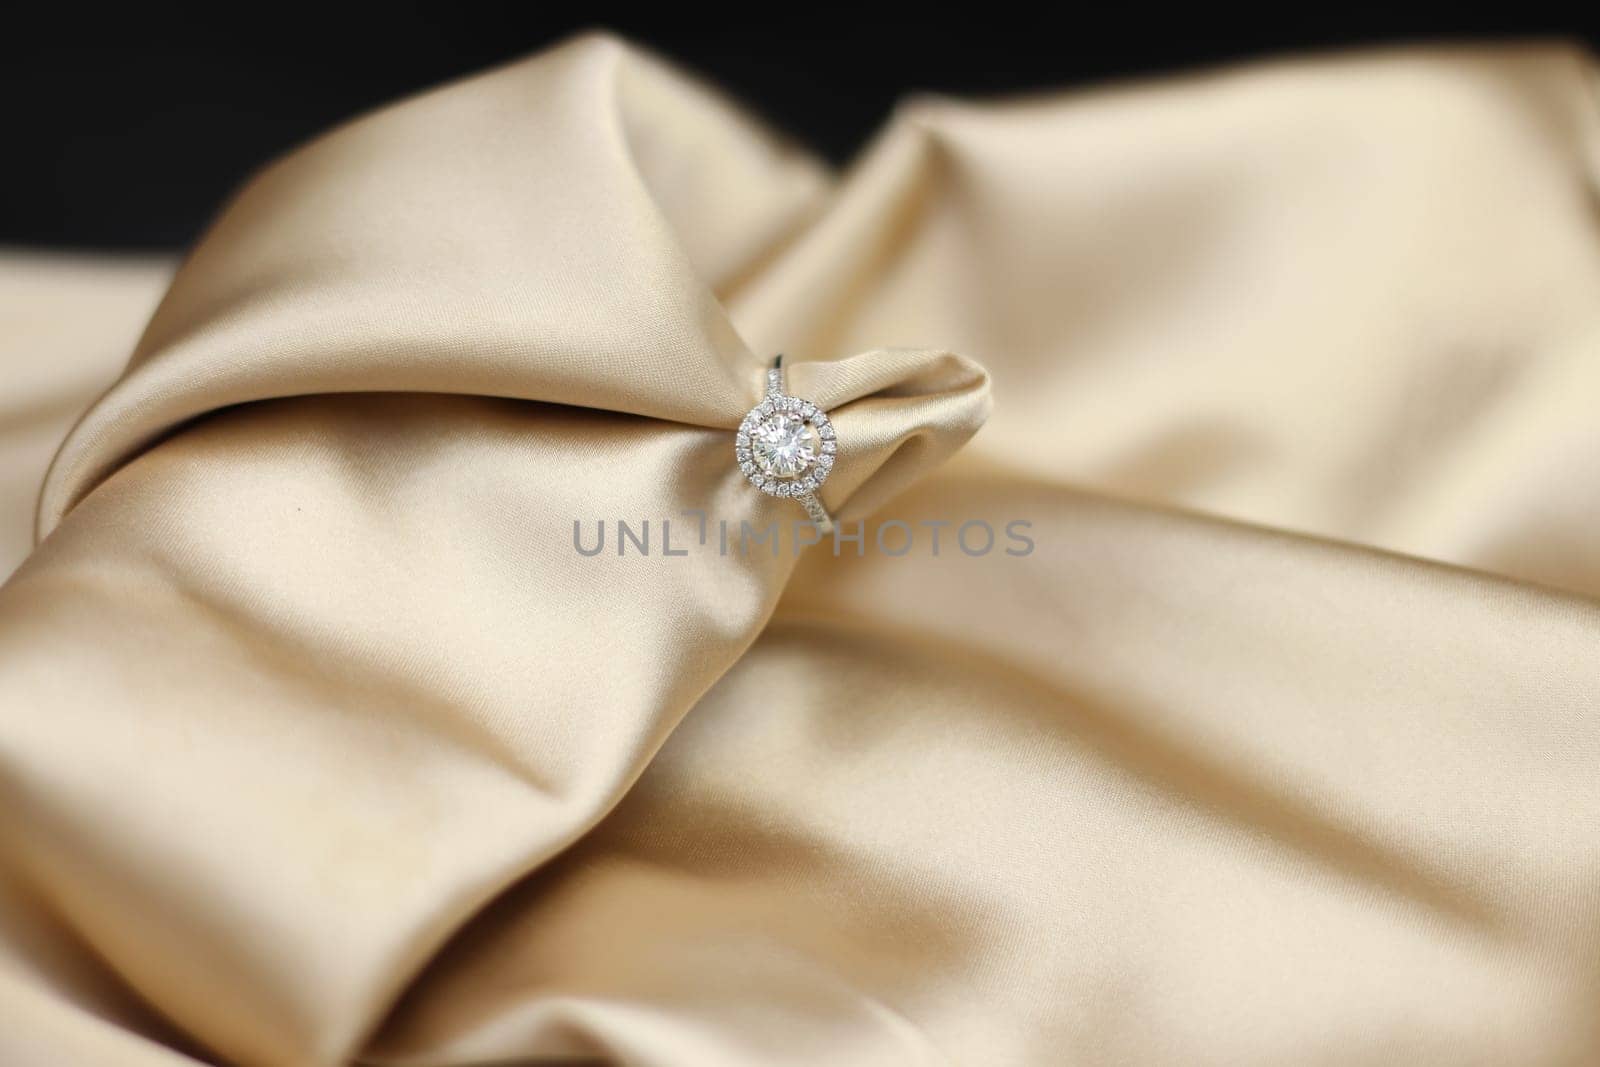 Luxury jewelryFine jewelry as diamond ring on white gold or platinum setting with red golden fabric background. Jewelry shop concept